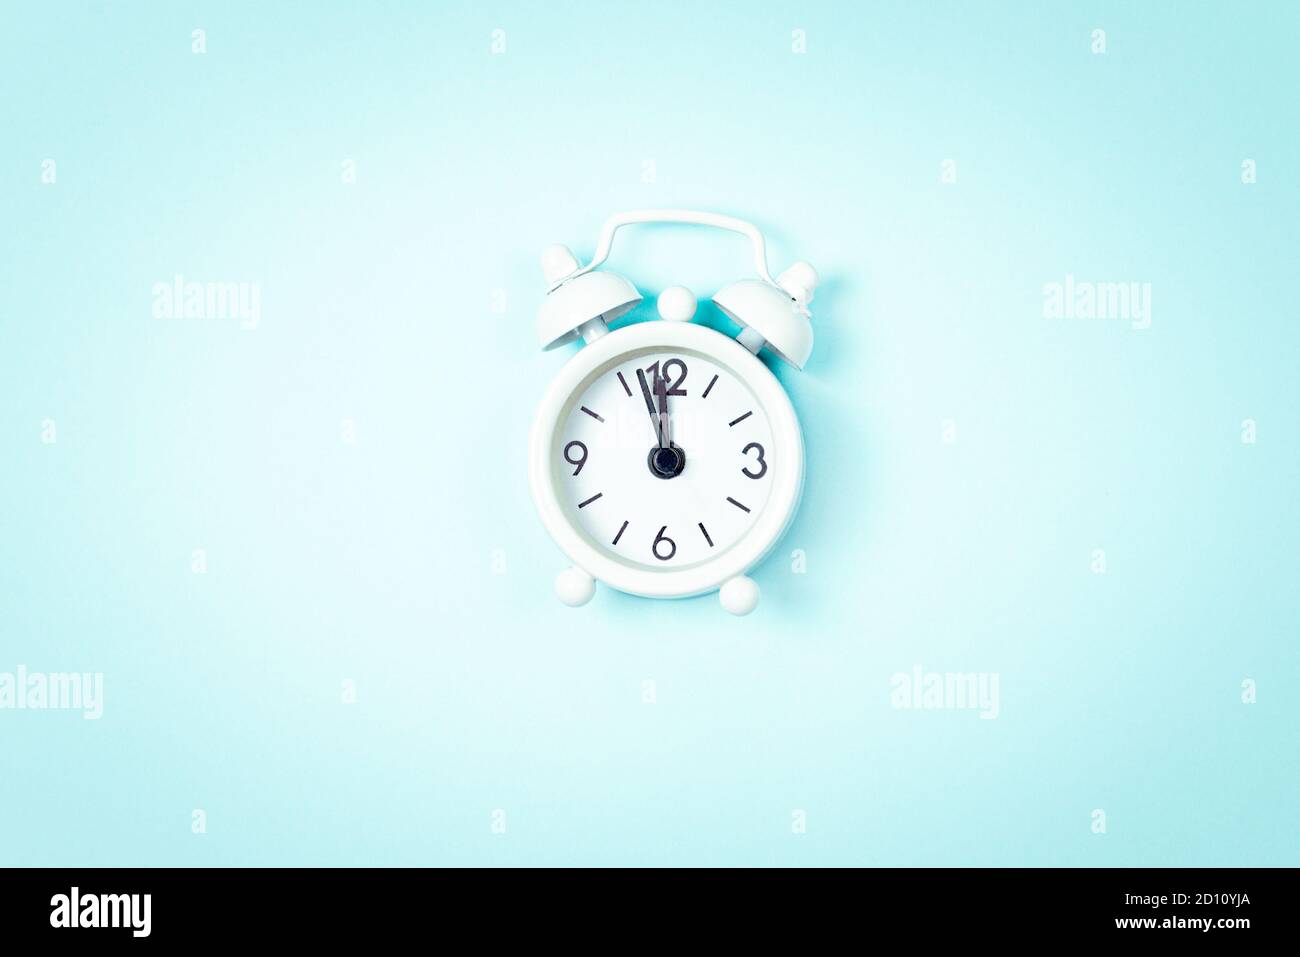 White vintage style alarm clock showing five minutes left untill midnight over blue background. New Year advent. Stock Photo